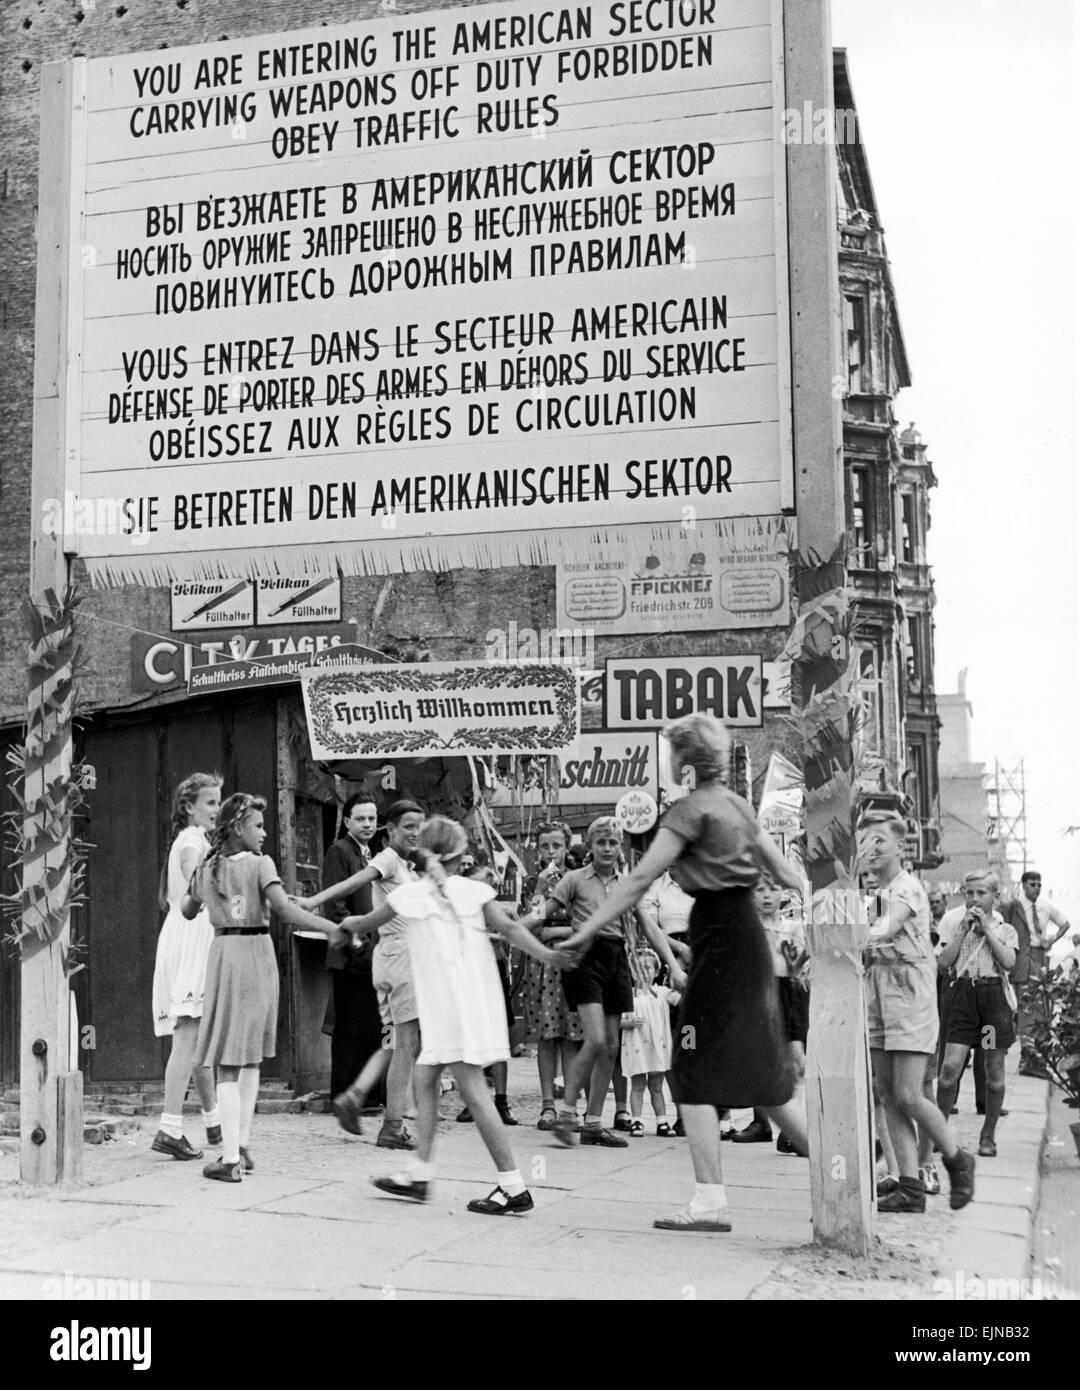 Berlin a city divided. Childrens party at the sector boundary Berlin 15th August 1953. This picture was taken from the eastern part of Friedrich strasse. It shows children playing in the vicinity of the sector boundary sign. Only a few months earlier in June during the workersÕ revolt in East Germany, American and Soviet tanks stood opposite each other in the Friedrich Strasse, creating a credible threat of force at the Allies sector line, Checkpoint Charlie. From that time on, the border crossing at Checkpoint Charlie symbolised the collision of two world systems of Democracy and Communism. F Stock Photo